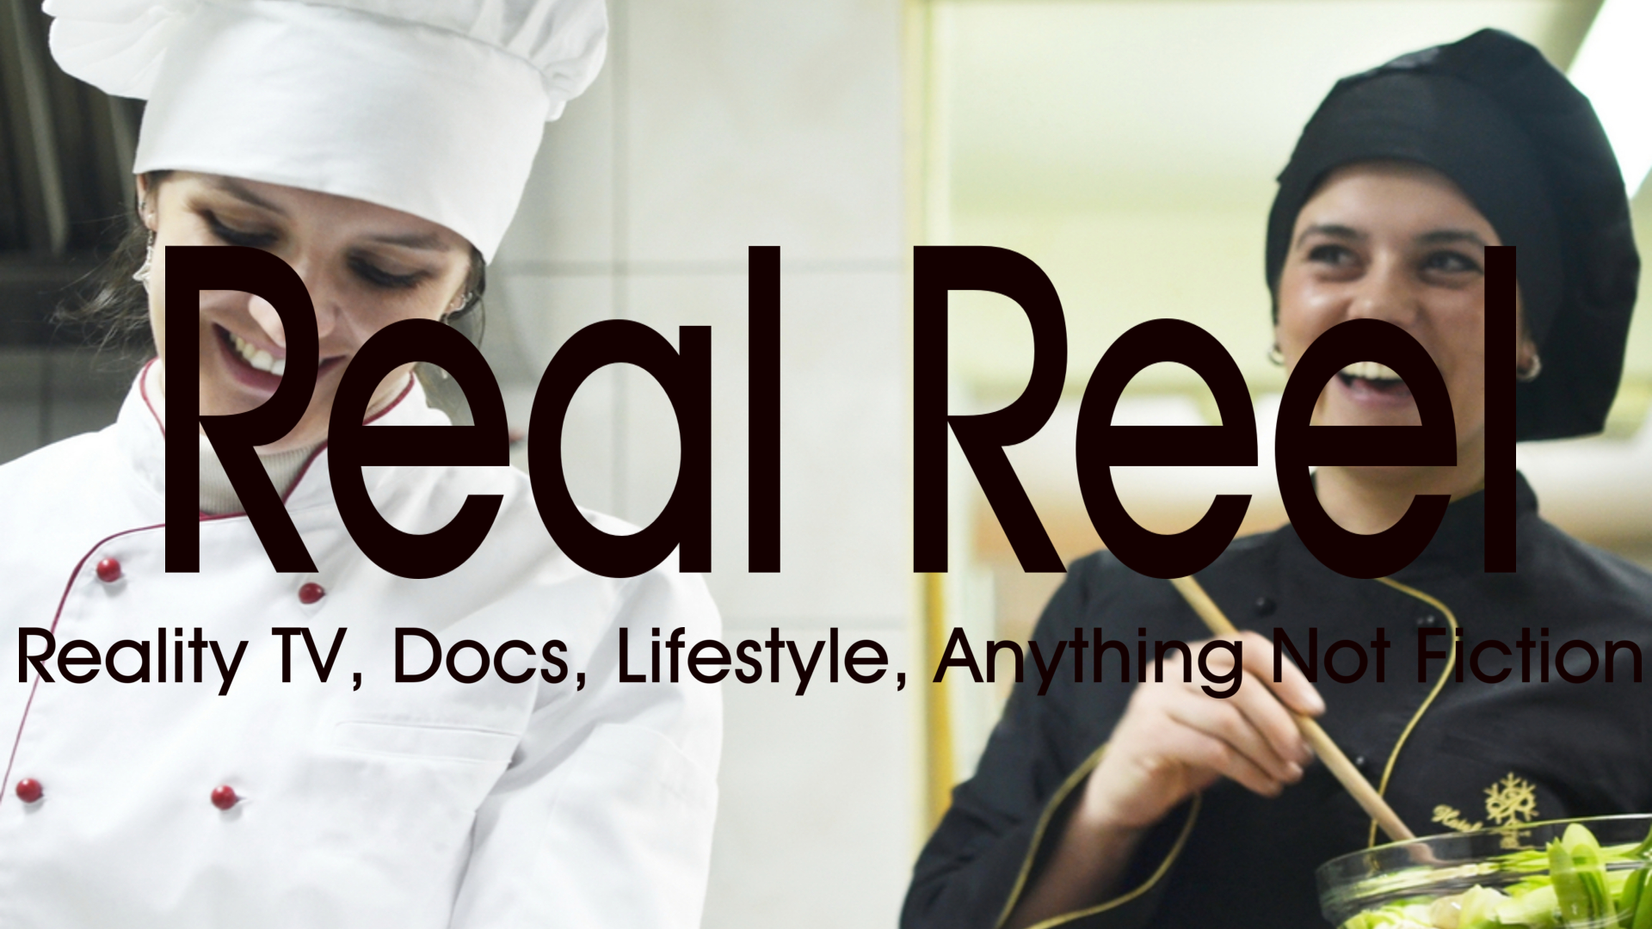 Real Reel - Reality TV Travel Food Lifestyle